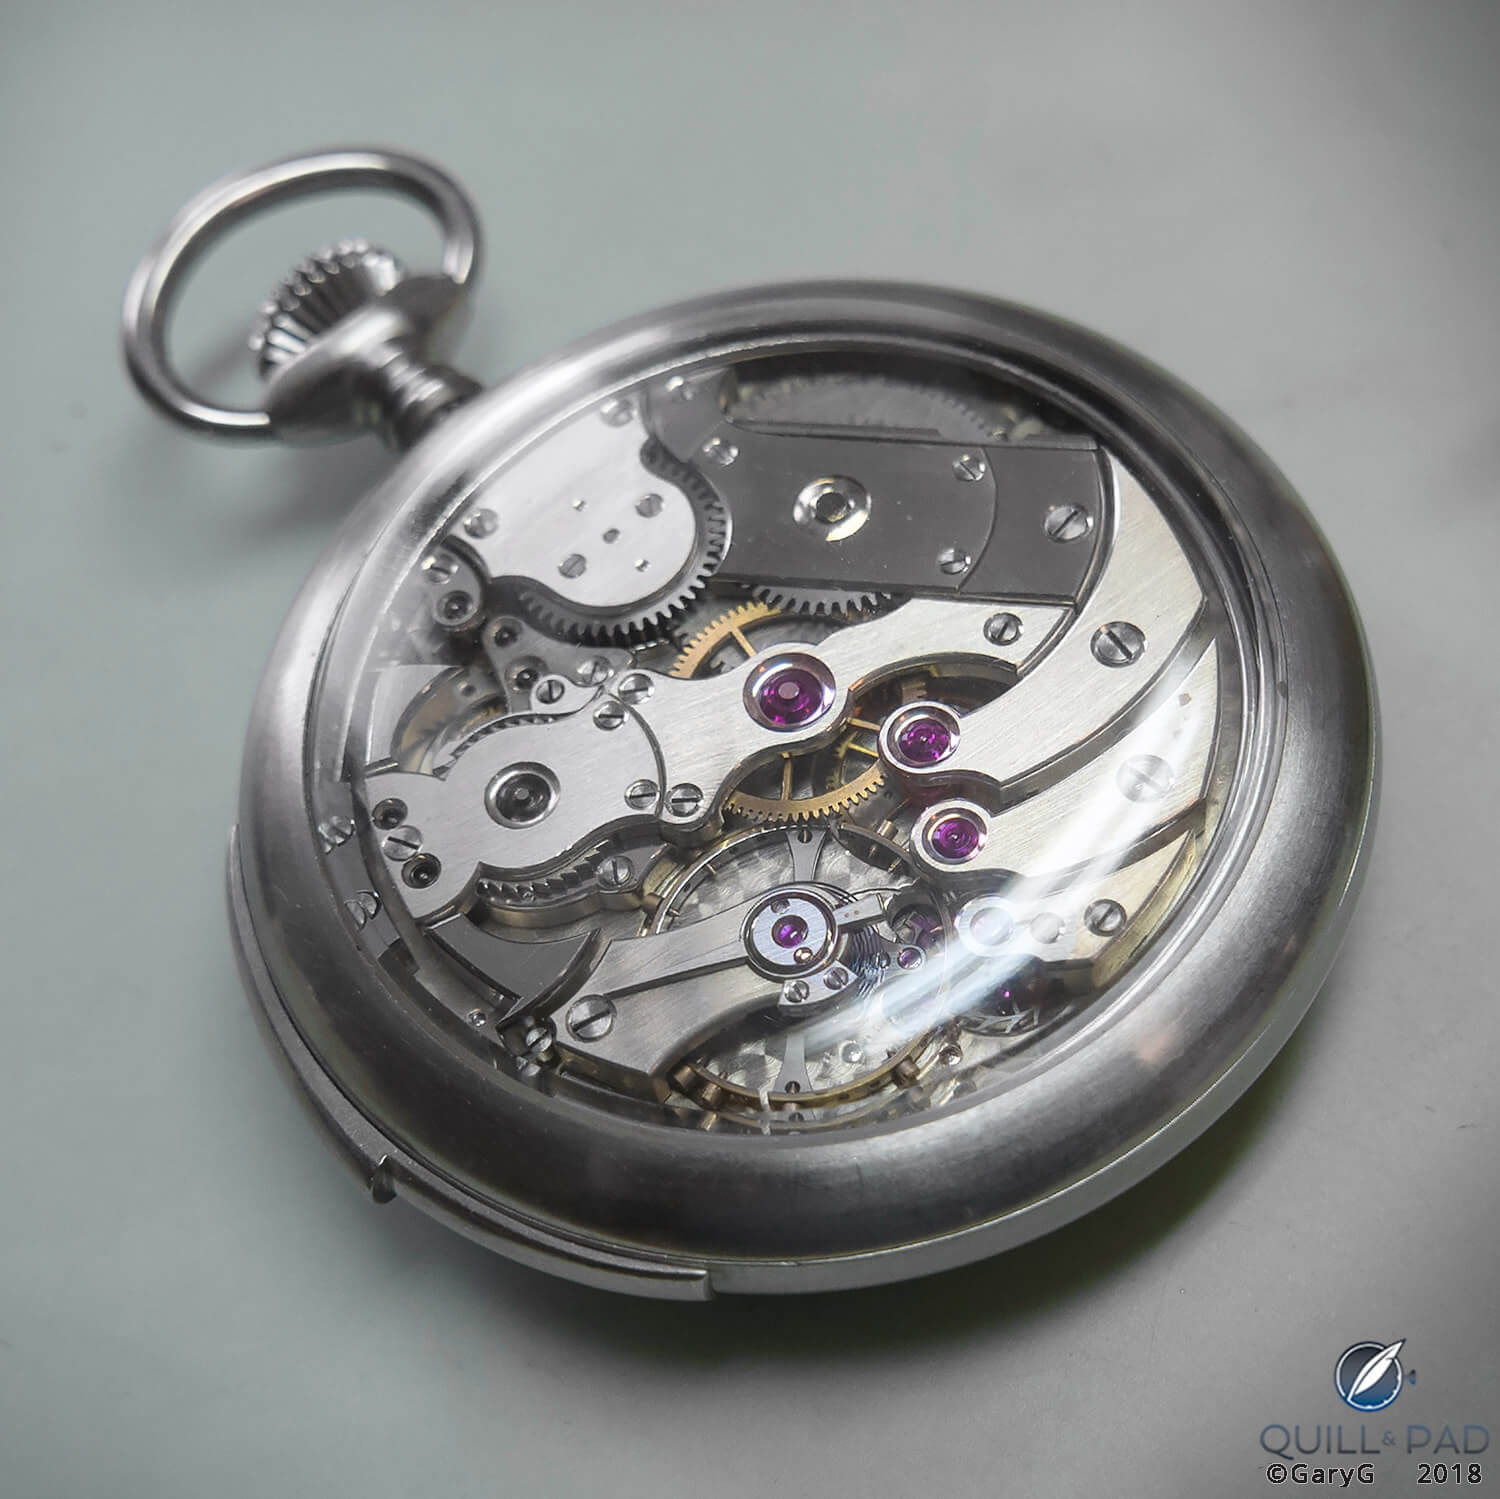 Steel-cased minute repeater by Philippe Dufour based on a discarded movement